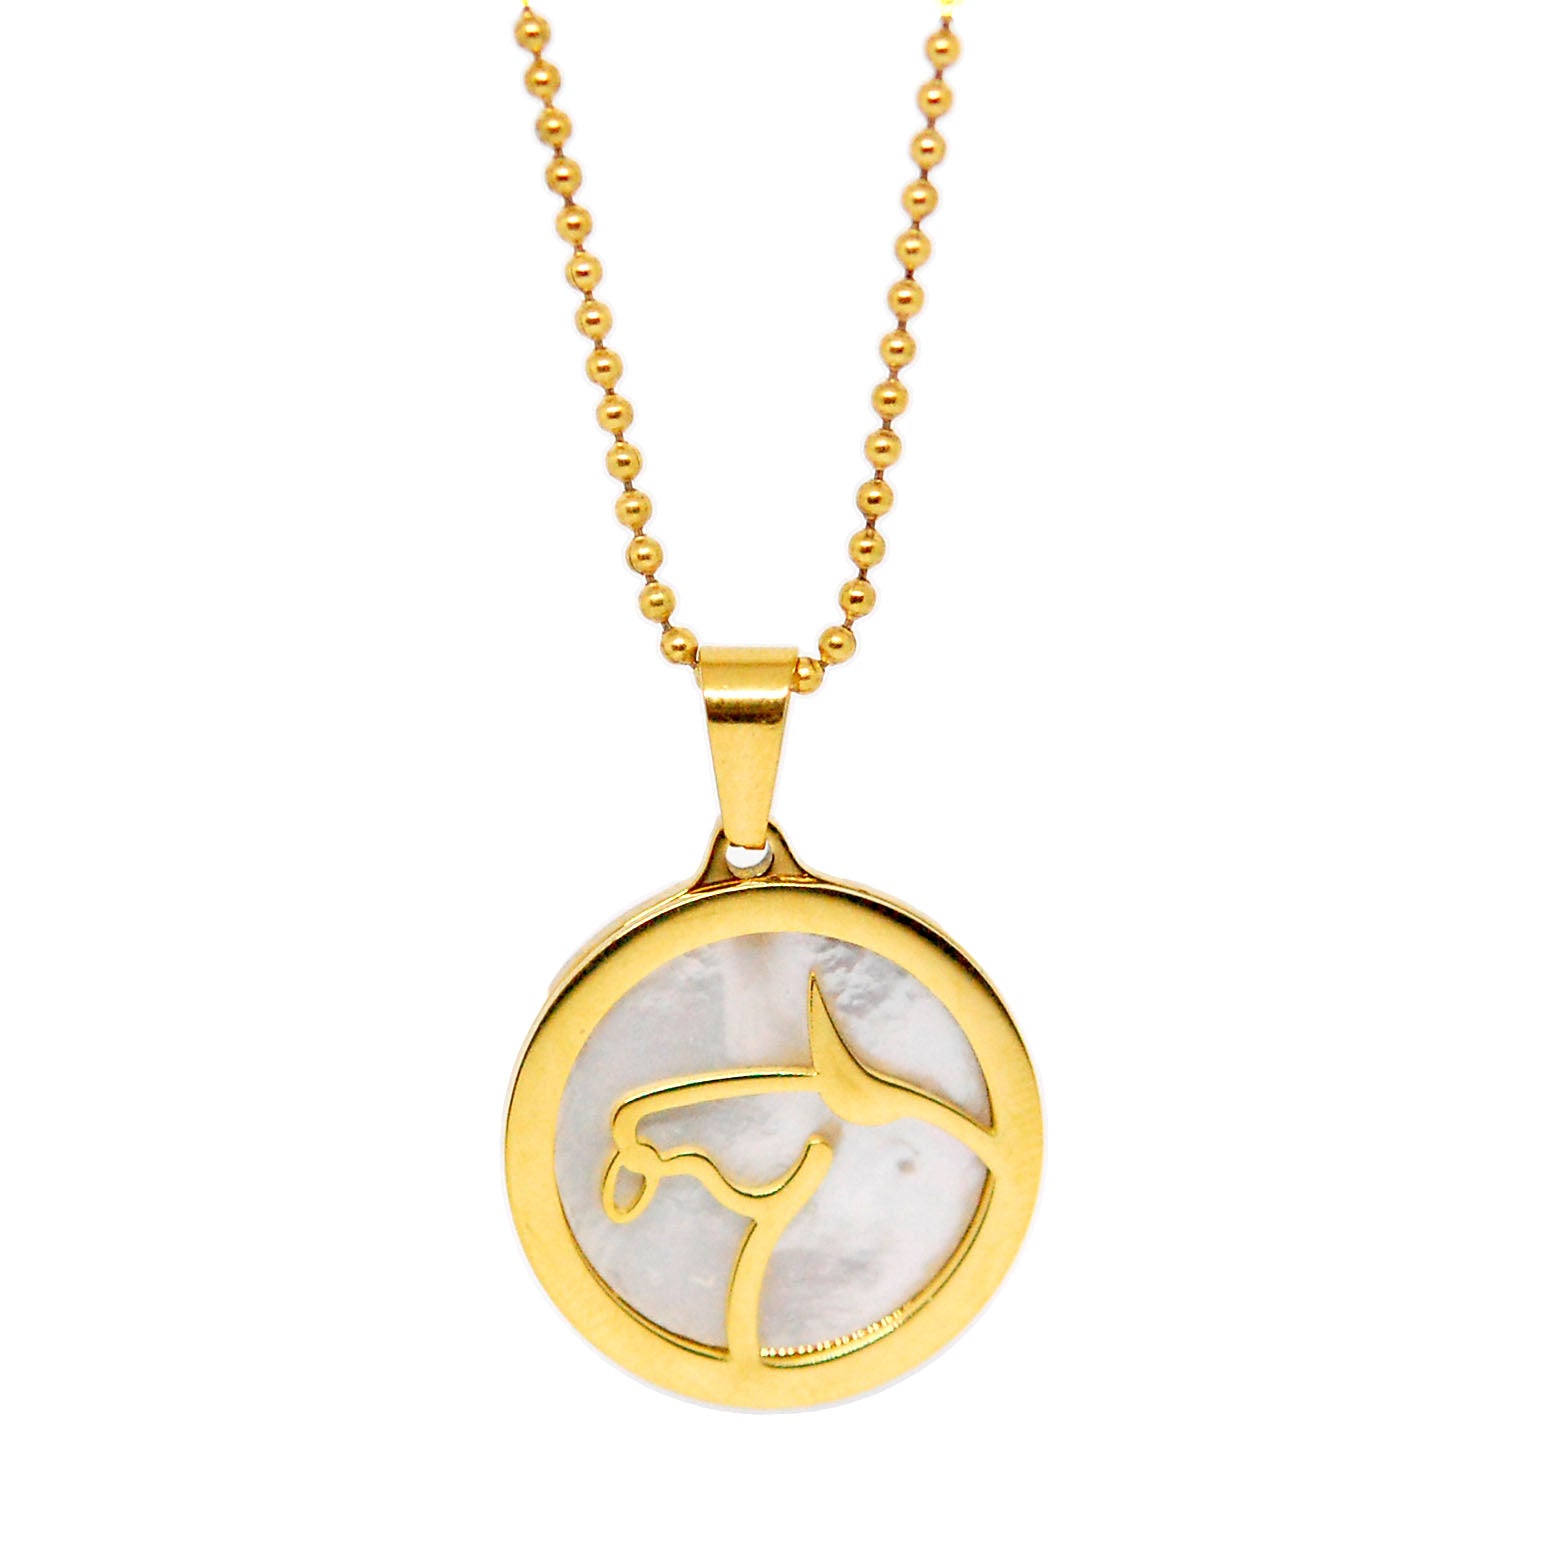 ESN 7962: All IPG Mop Taurus Zodiac Necklace w/ 18" IPG Ball Chain